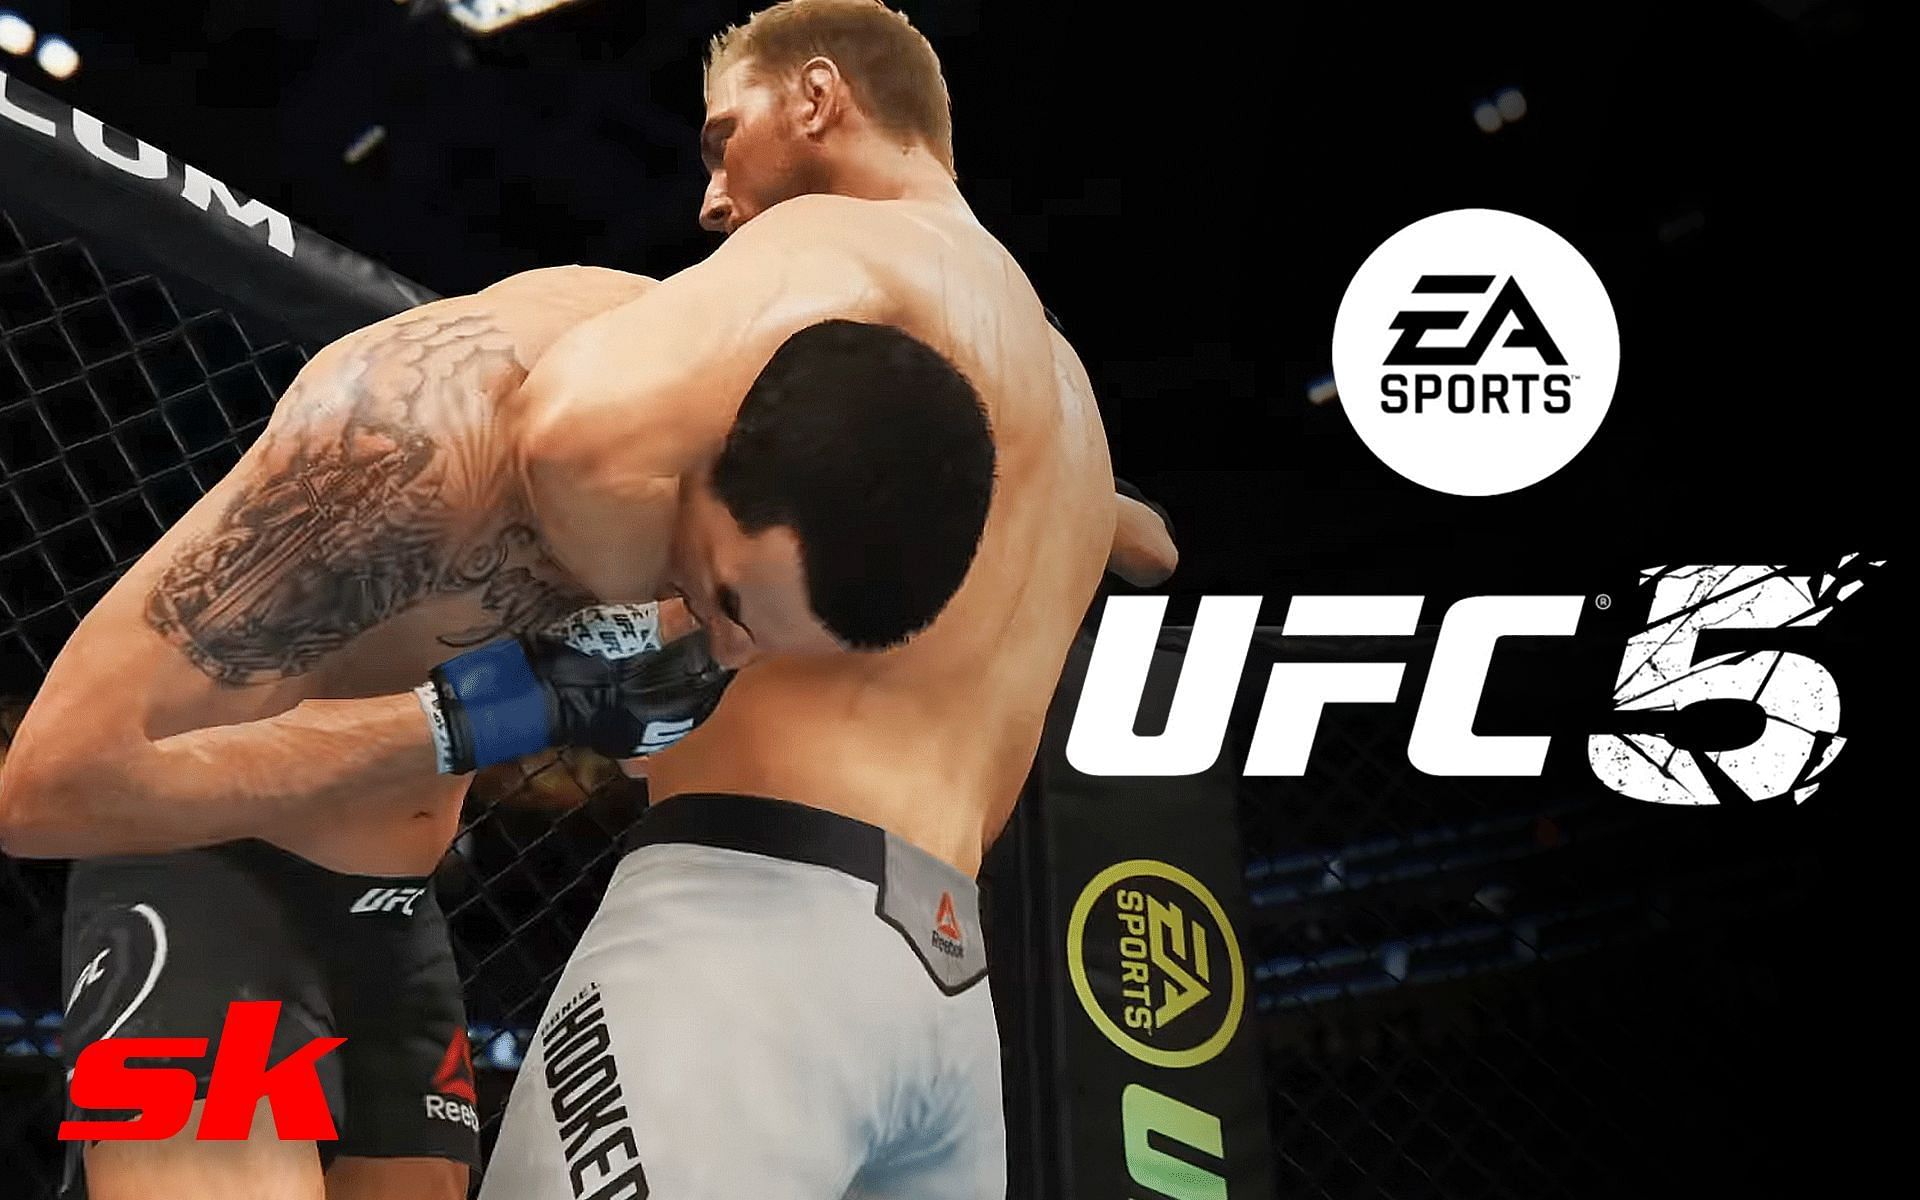 UFC 5 gameplay: When is UFC 5 coming out? Why is it rated 'Mature